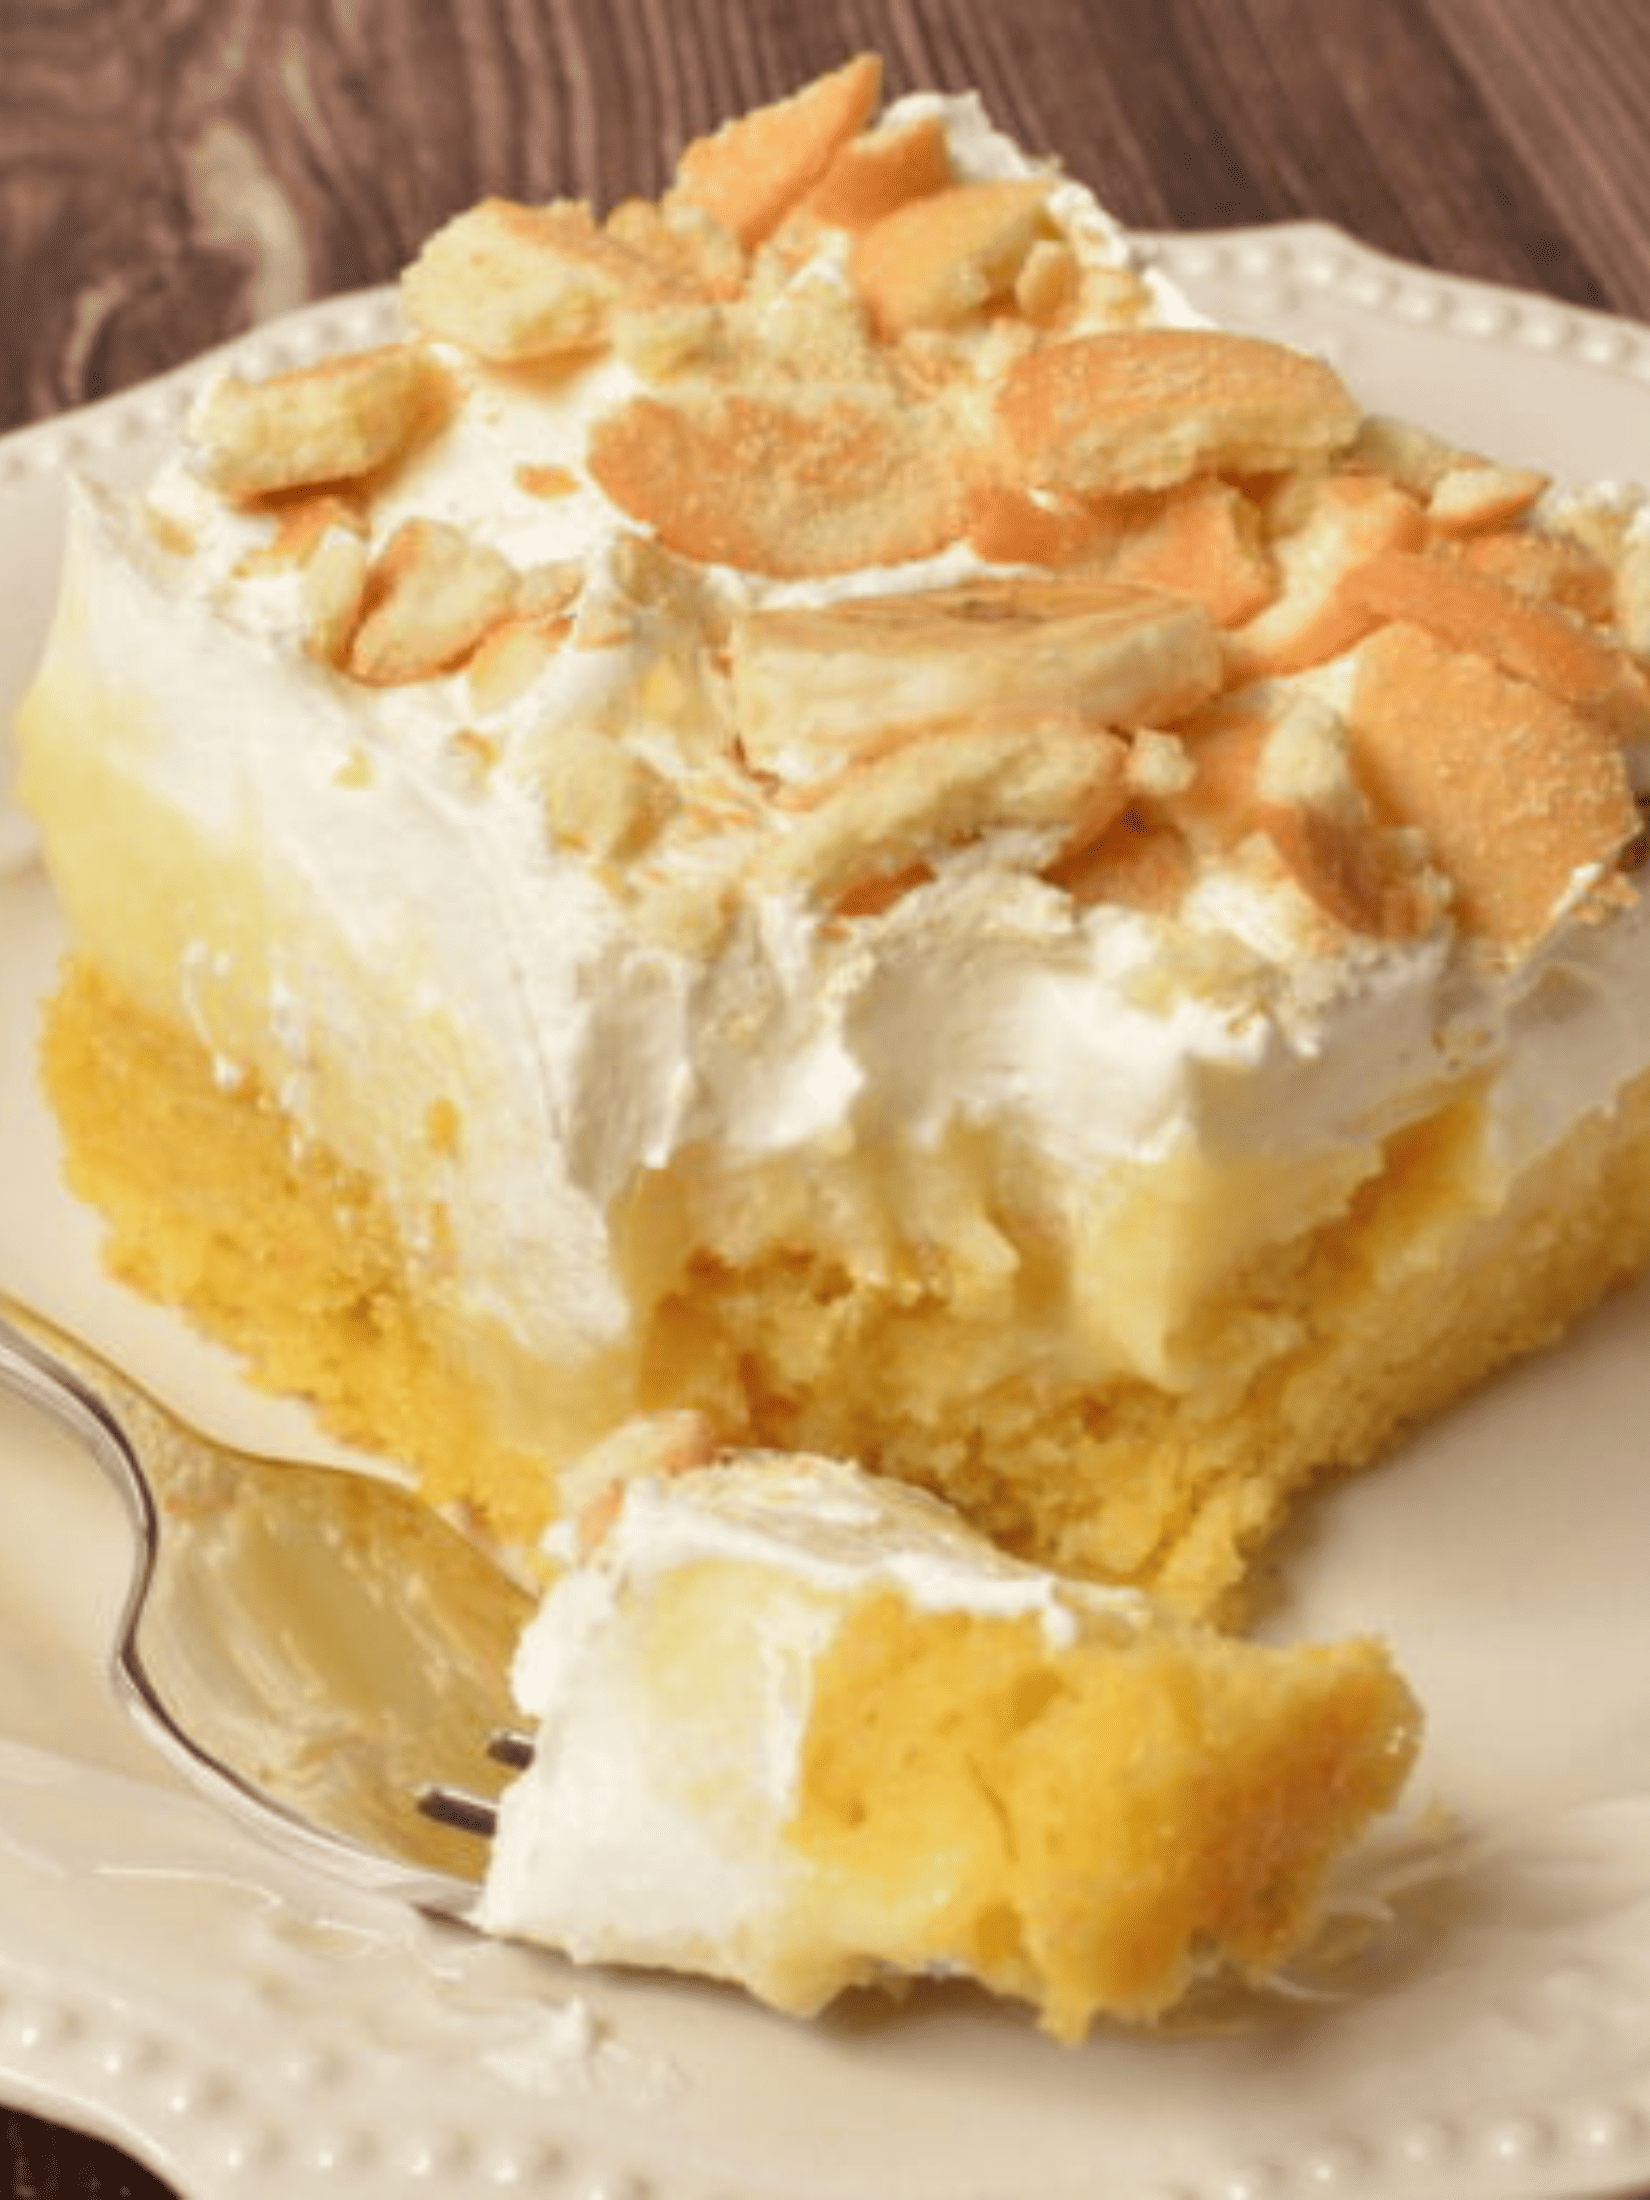 a tempting slice of banana pudding cake, adorned with layers of moist sponge, velvety pudding, and a generous topping of whipped cream and sliced bananas.